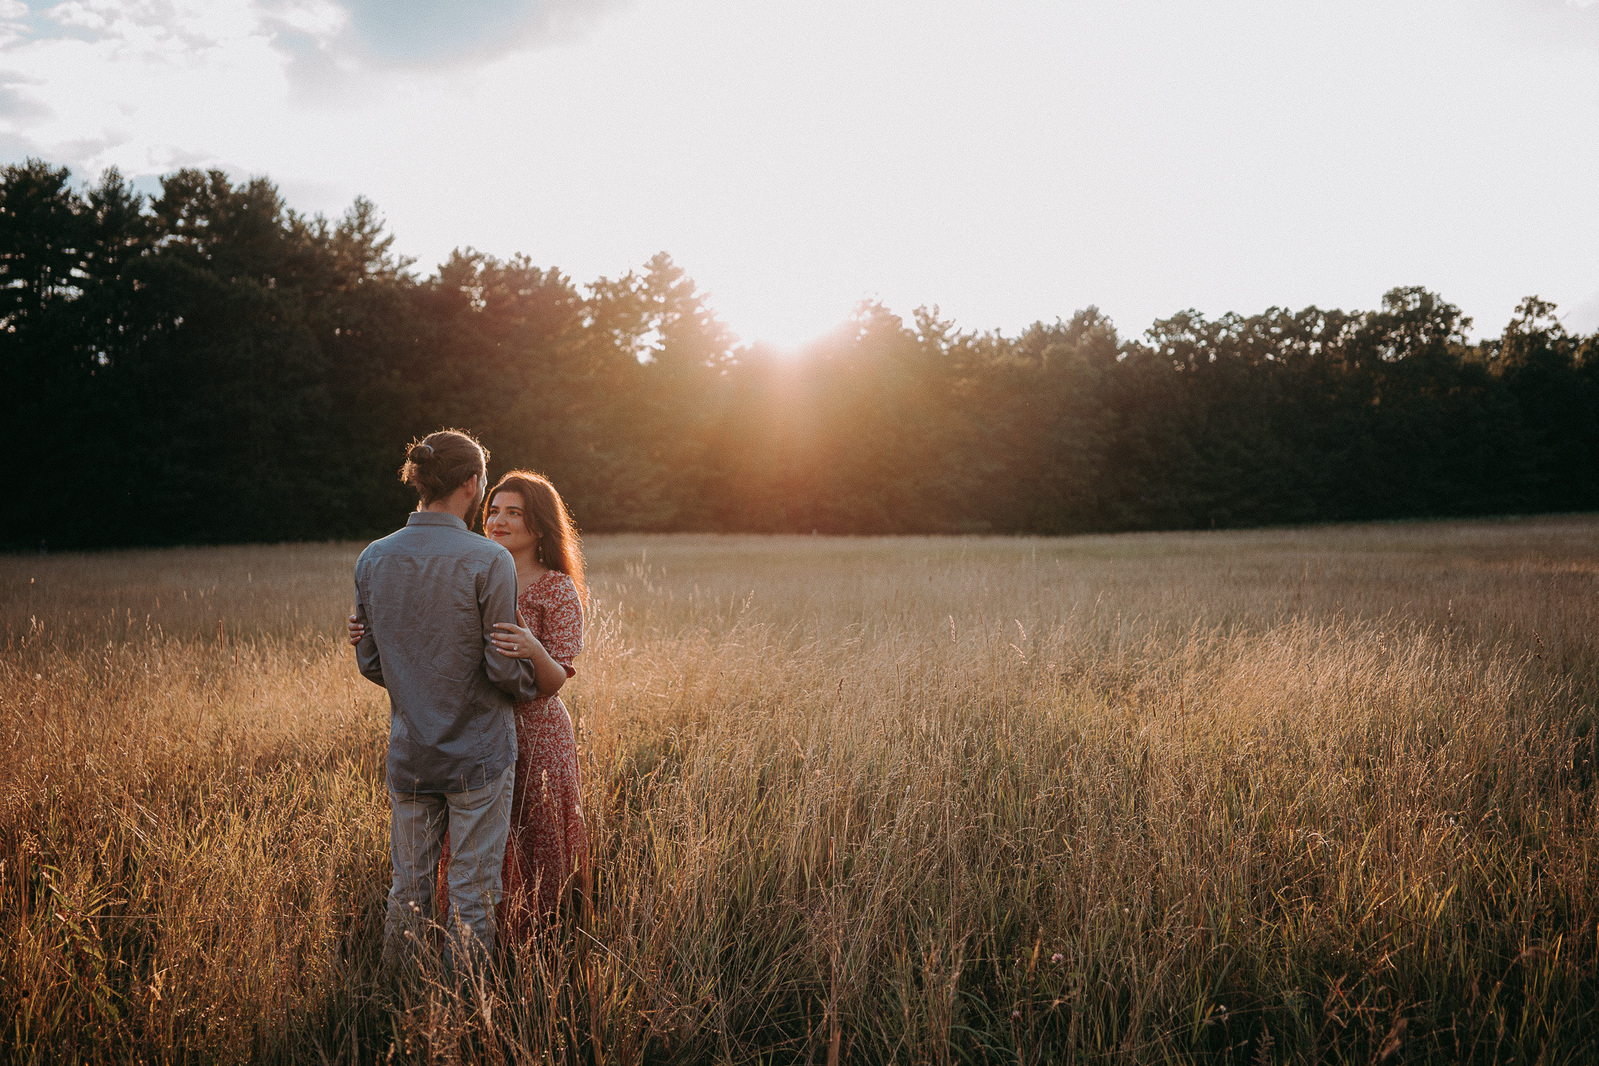 Golden-hour engagement session in grassy field during sunset.